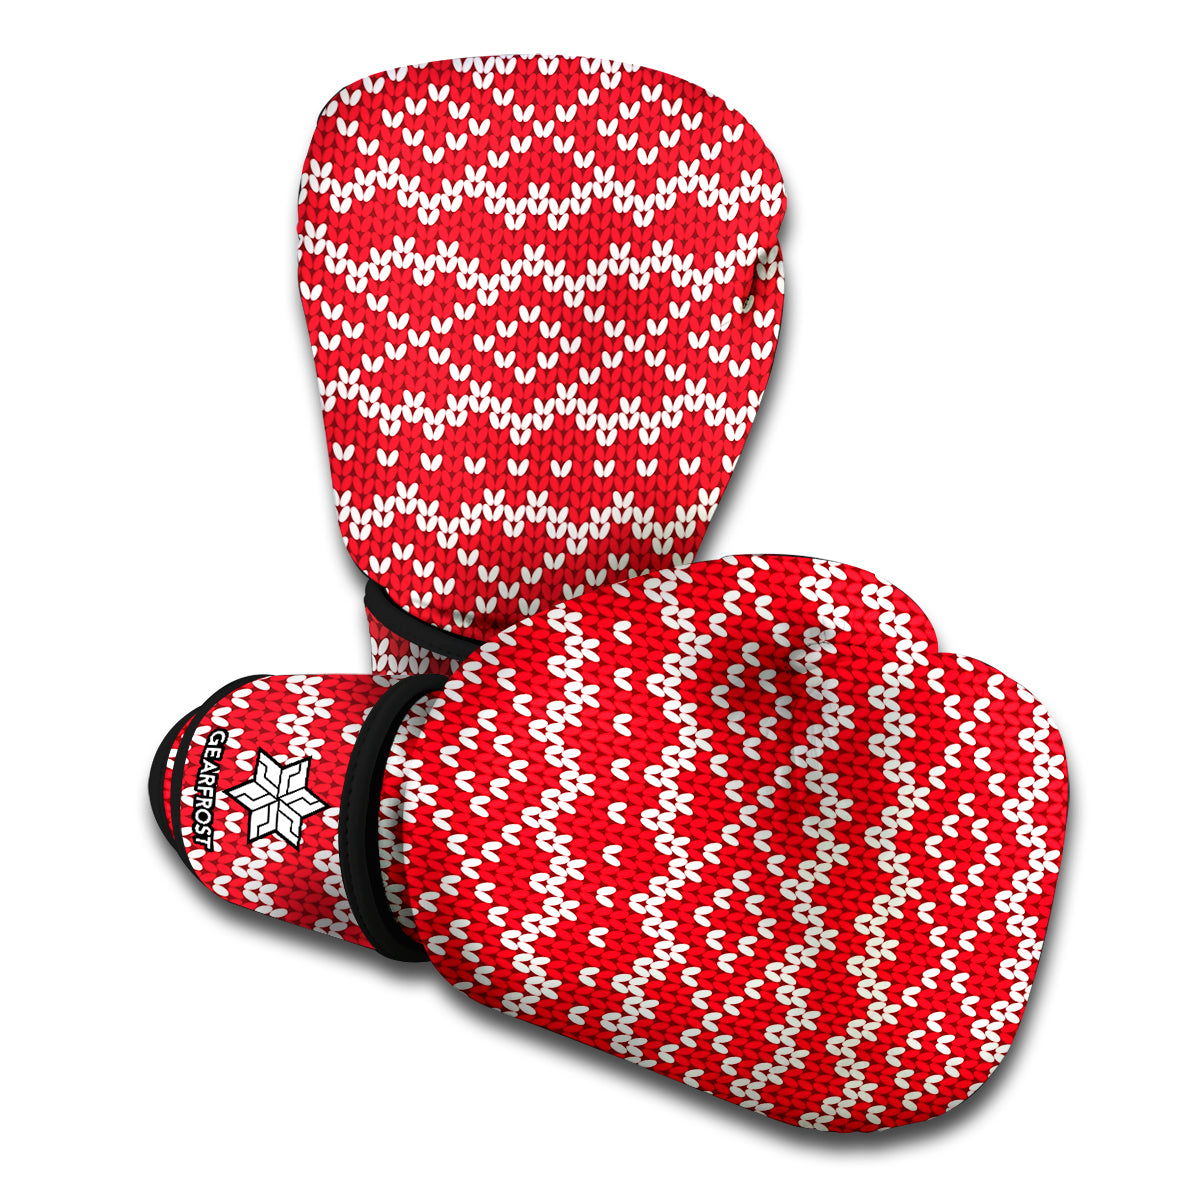 Geometric Knitted Pattern Print Boxing Gloves